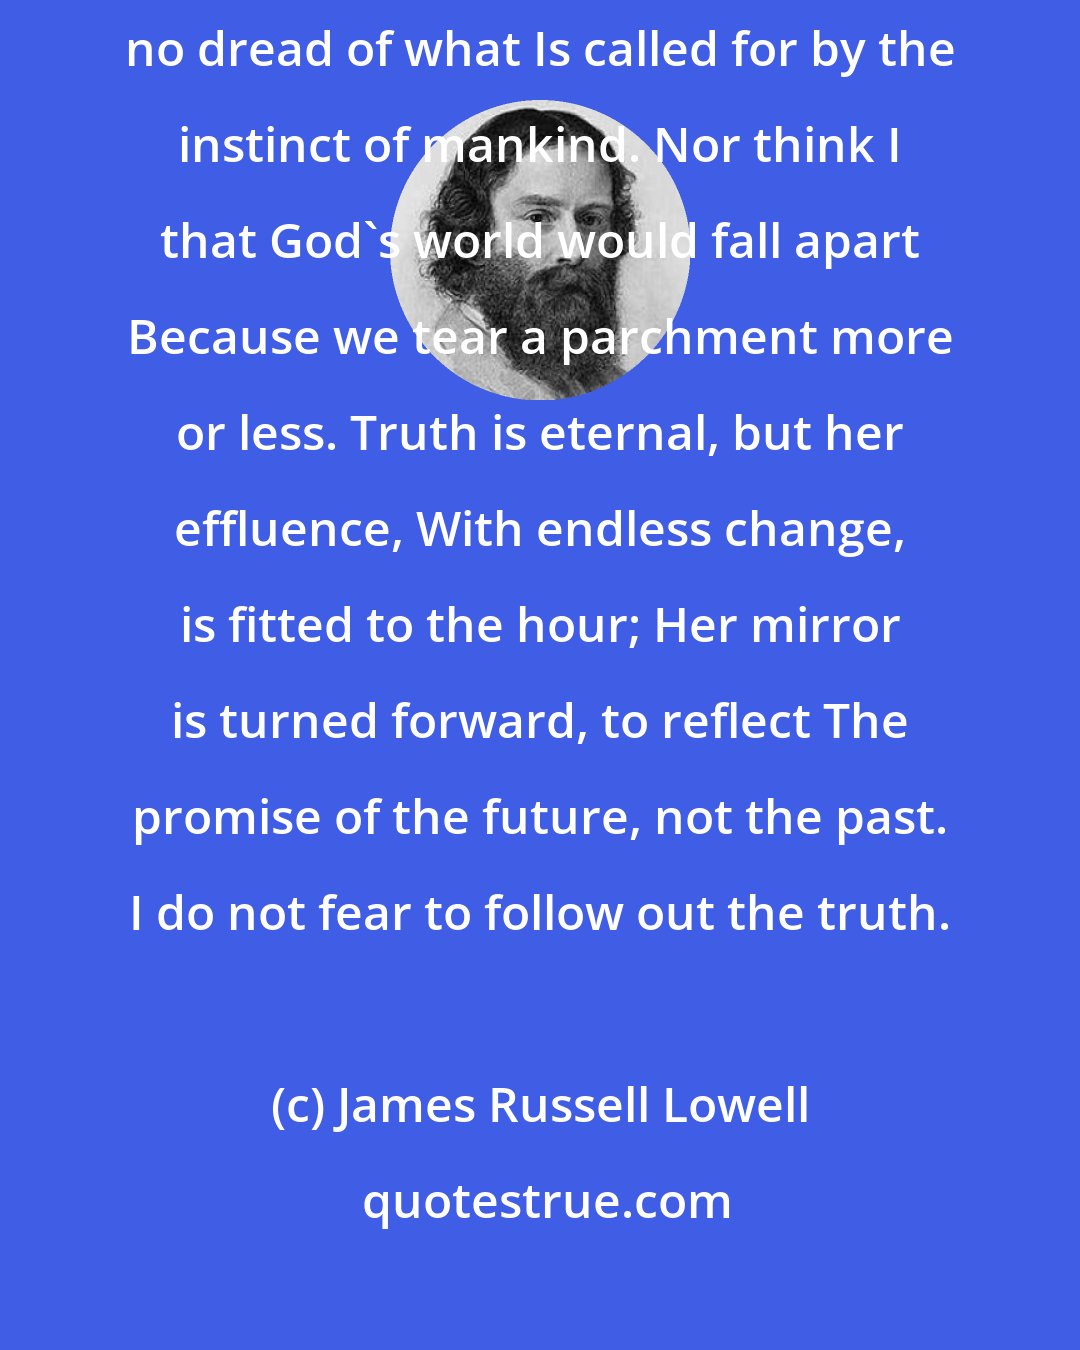 James Russell Lowell: The time is ripe, and rotten-ripe, for change; Then let it come: I have no dread of what Is called for by the instinct of mankind. Nor think I that God's world would fall apart Because we tear a parchment more or less. Truth is eternal, but her effluence, With endless change, is fitted to the hour; Her mirror is turned forward, to reflect The promise of the future, not the past. I do not fear to follow out the truth.